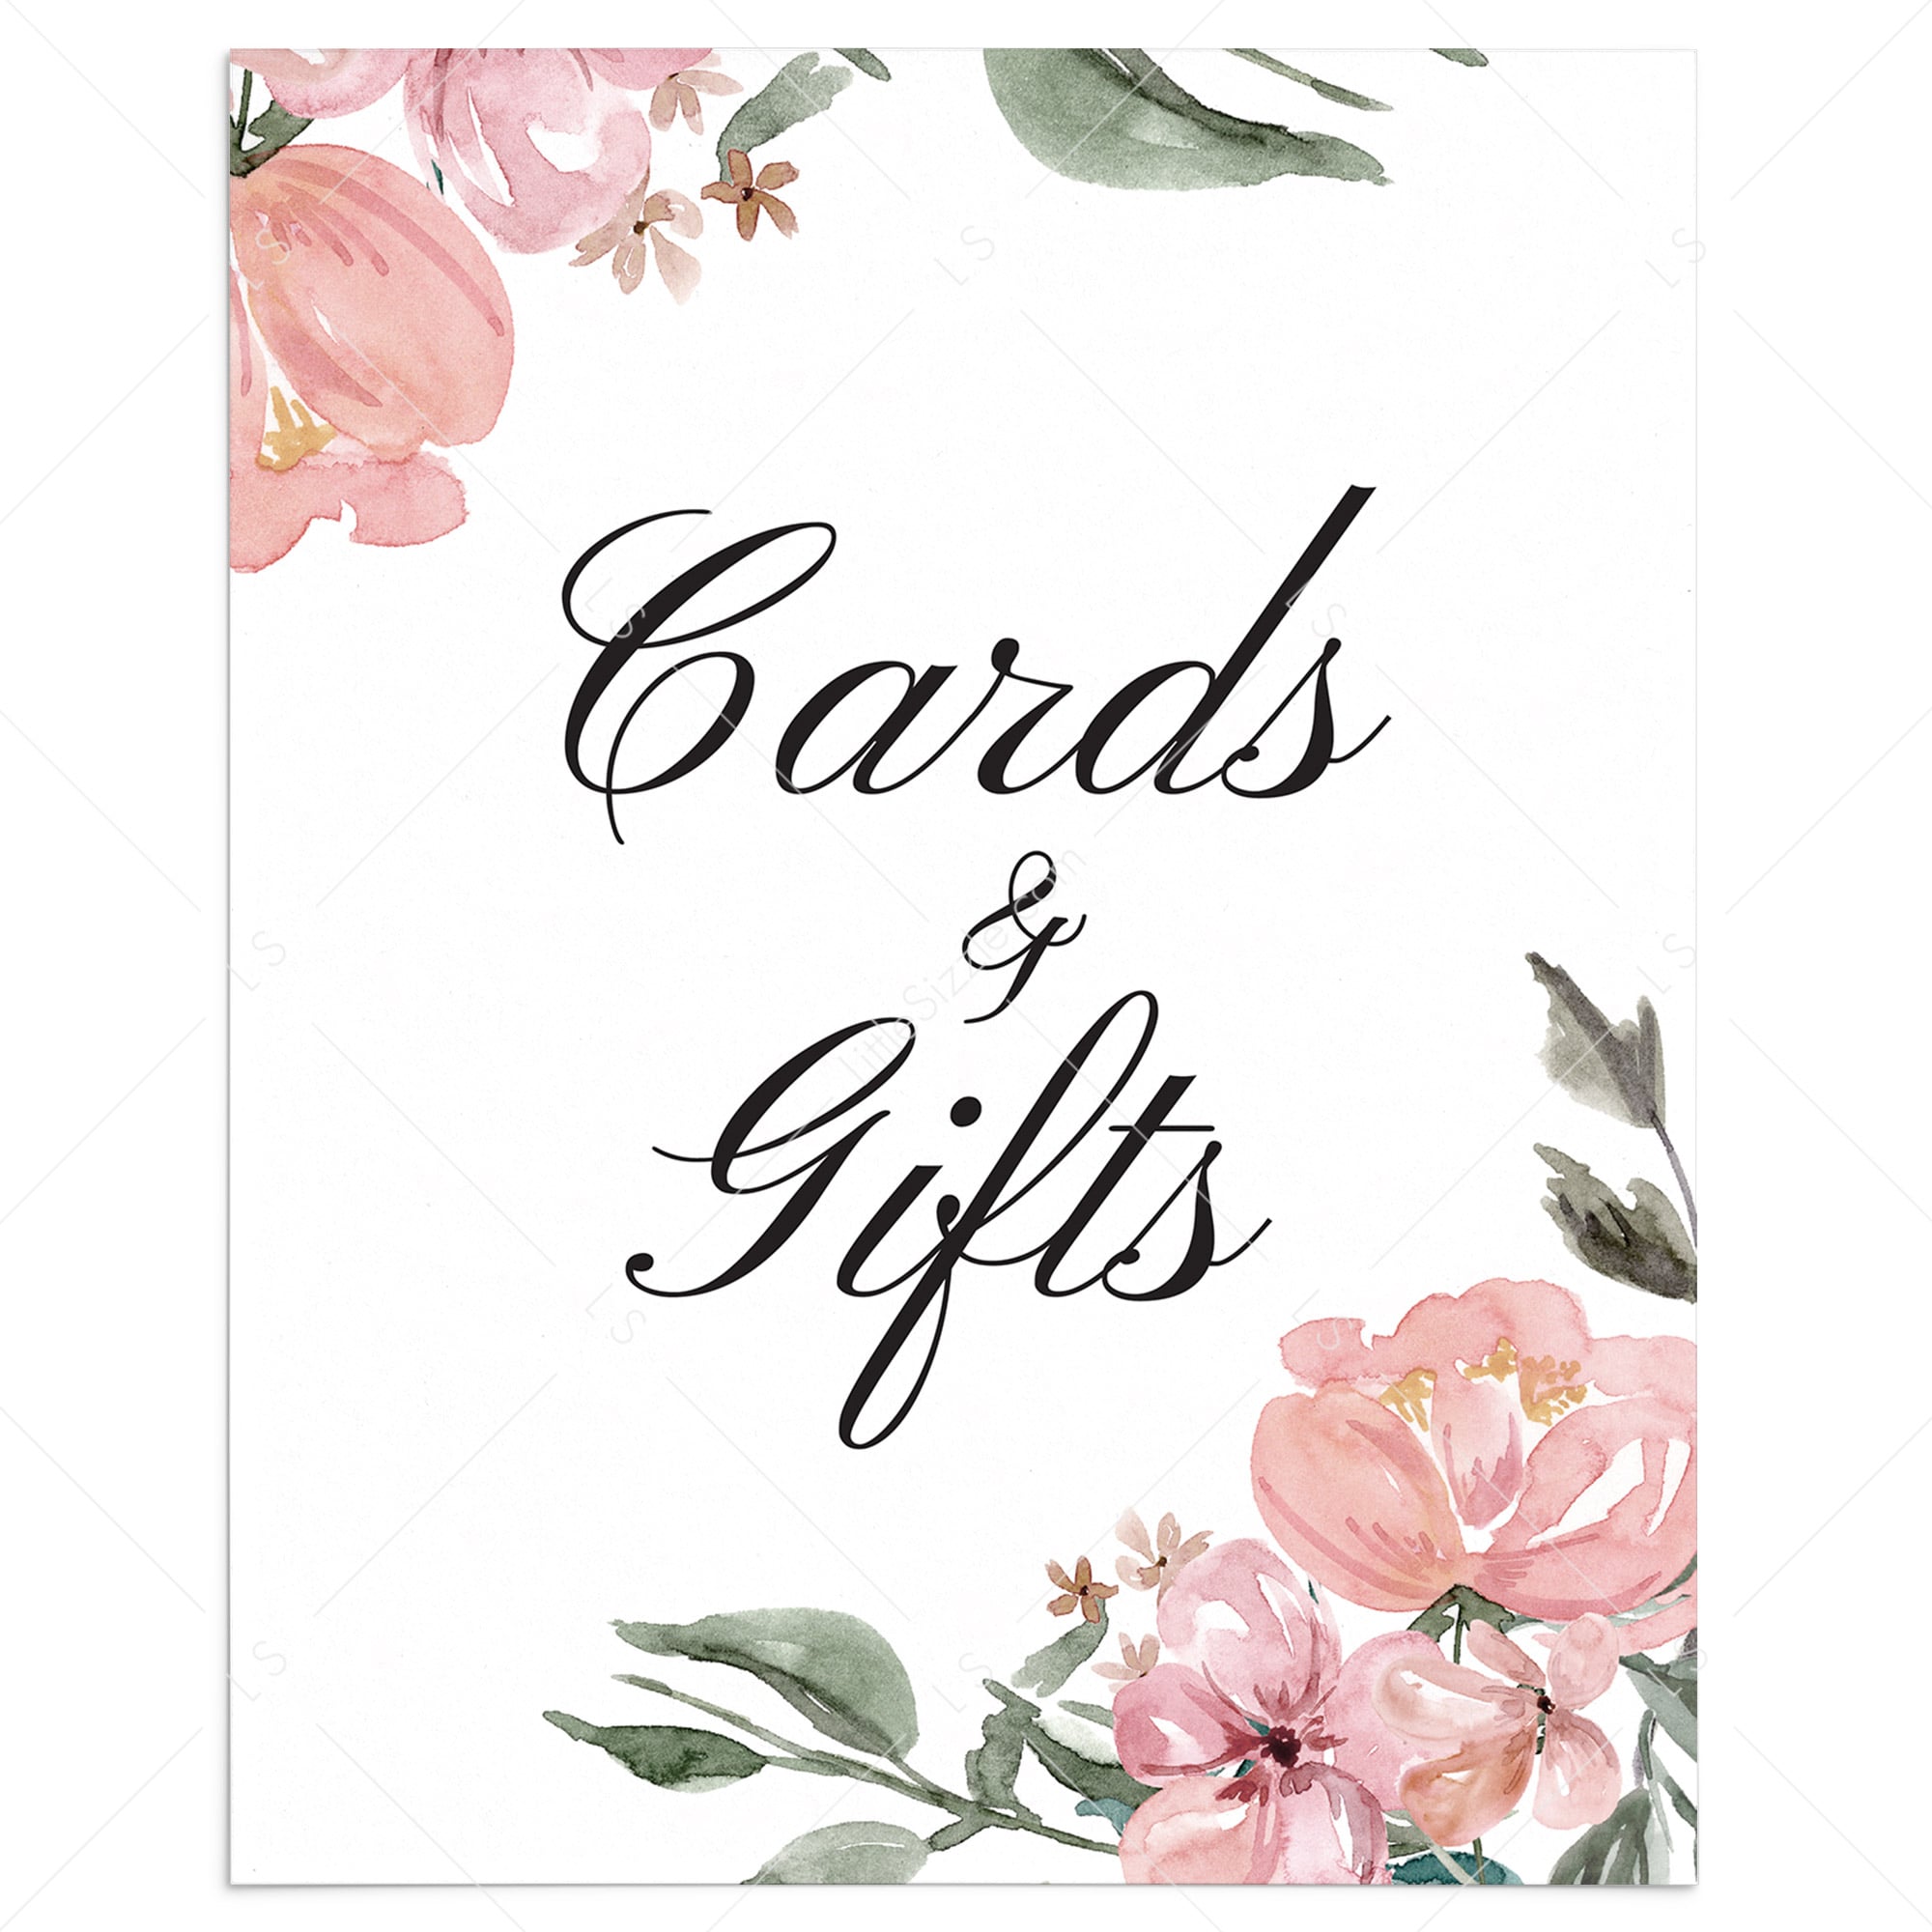 Pink floral shower cards and gifts sign printable by LittleSizzle